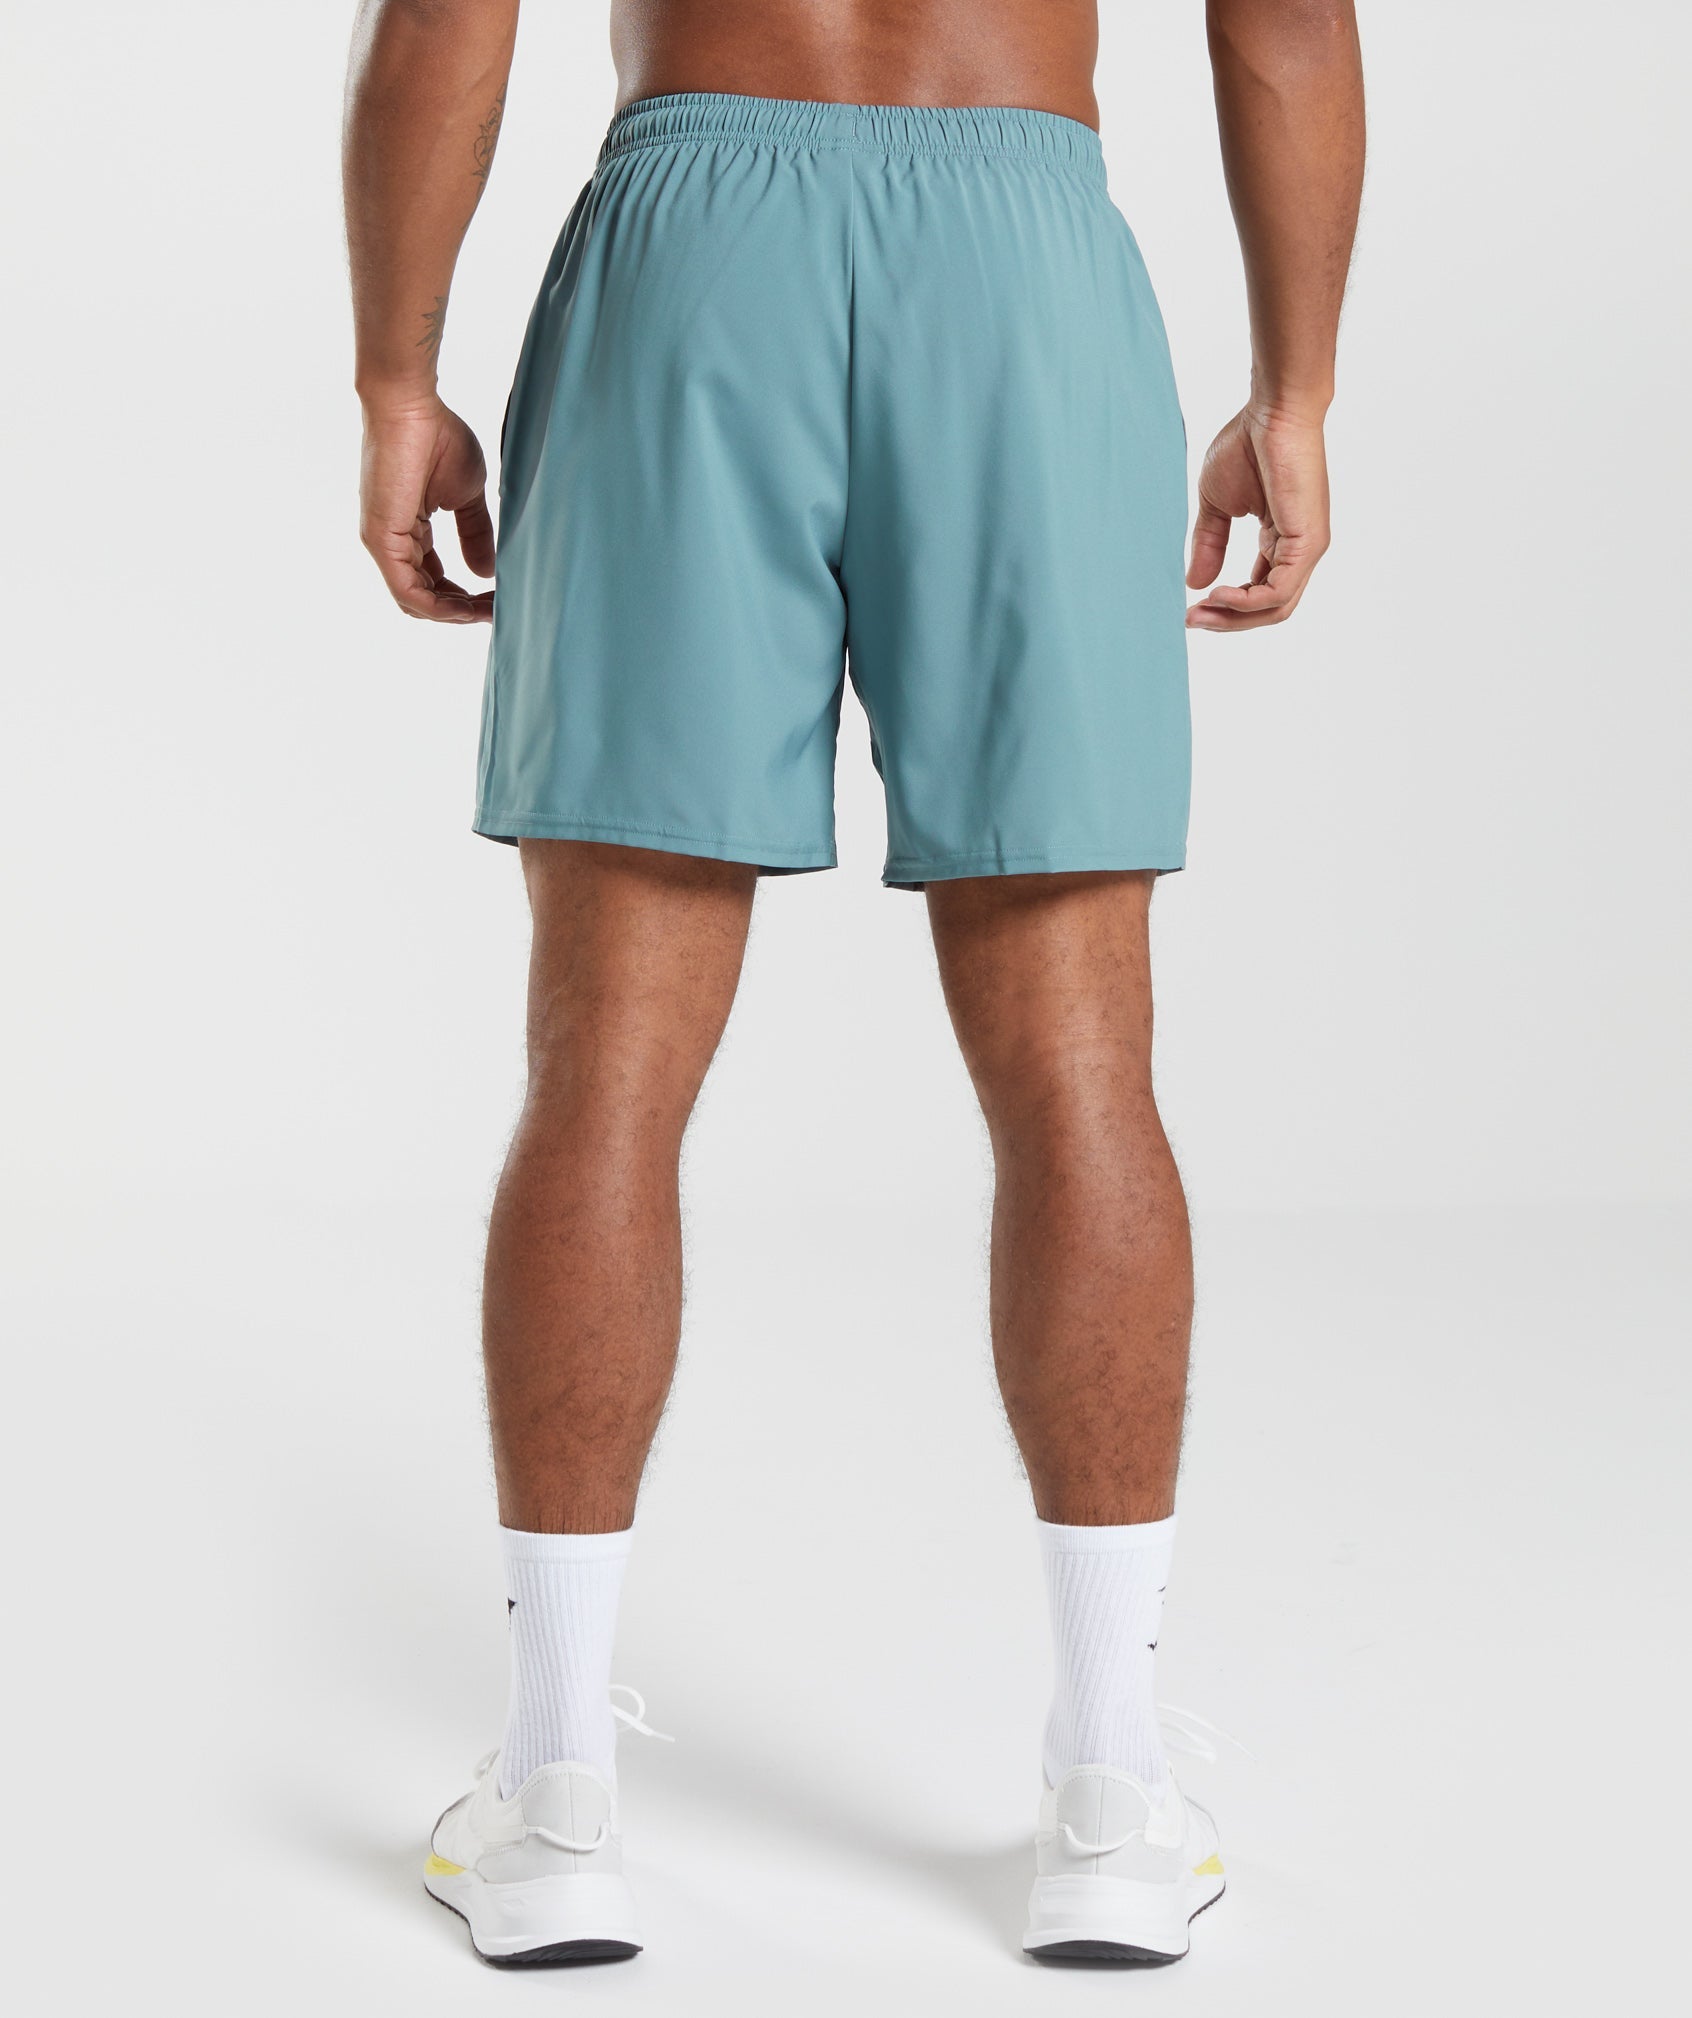 Arrival 7" Shorts in Thunder Blue - view 2